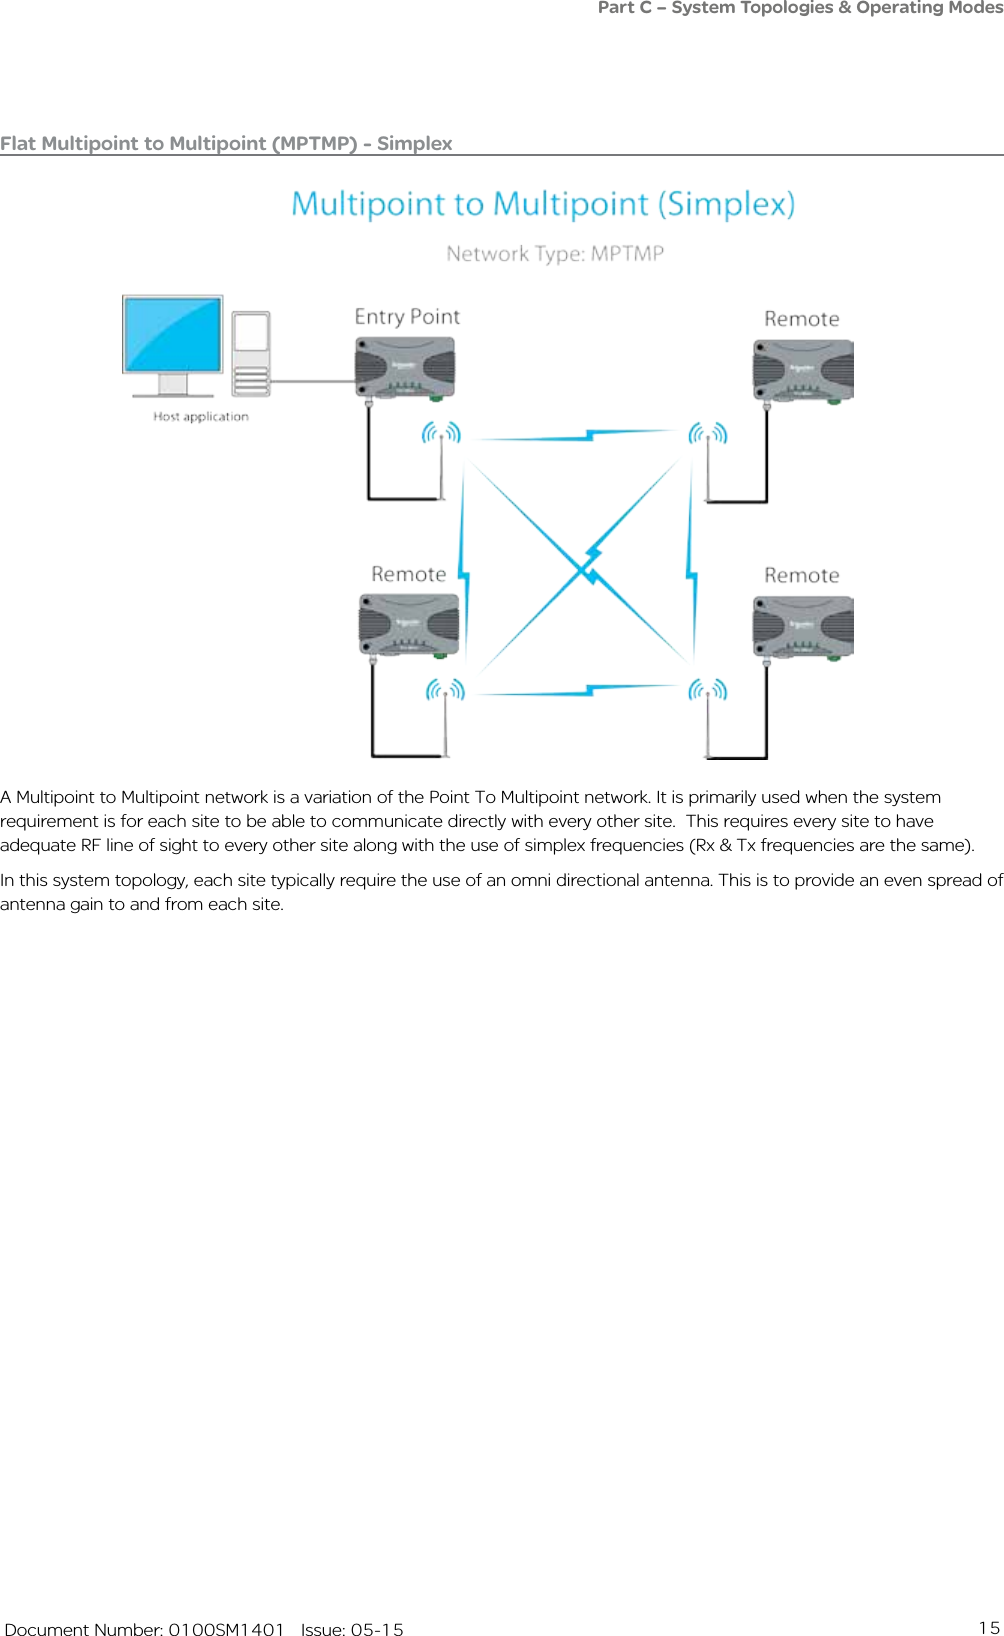 15   Document Number: 0100SM1401   Issue: 05-15Flat Multipoint to Multipoint (MPTMP) - SimplexA Multipoint to Multipoint network is a variation of the Point To Multipoint network. It is primarily used when the system requirement is for each site to be able to communicate directly with every other site.  This requires every site to have adequate RF line of sight to every other site along with the use of simplex frequencies (Rx &amp; Tx frequencies are the same).In this system topology, each site typically require the use of an omni directional antenna. This is to provide an even spread of antenna gain to and from each site. Part C – System Topologies &amp; Operating Modes